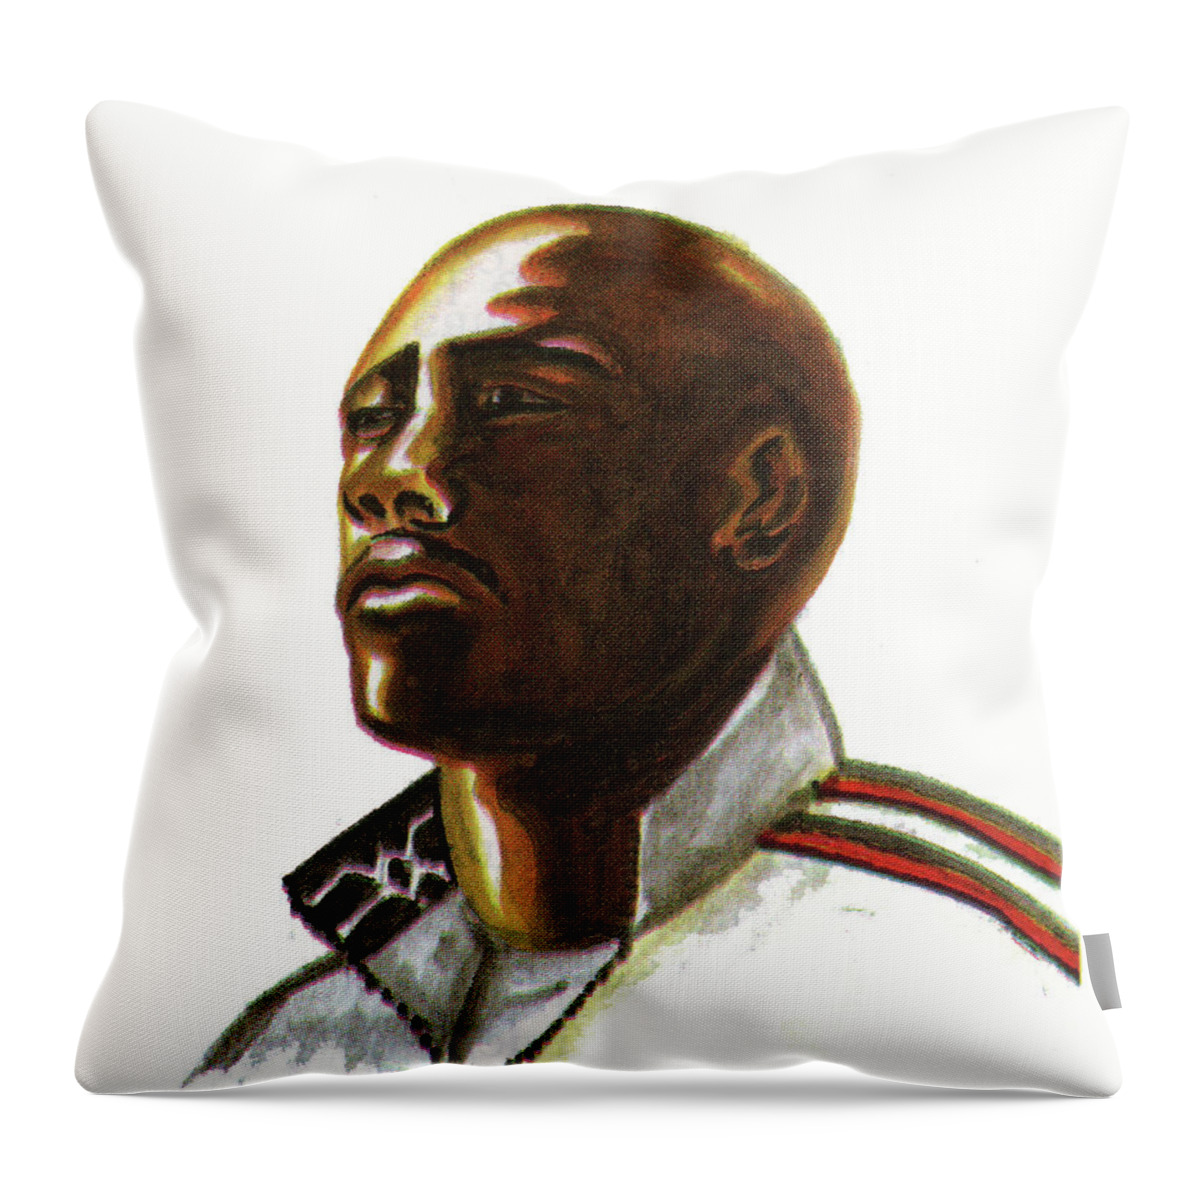 Portraits Throw Pillow featuring the painting Franckie Fredericks by Emmanuel Baliyanga